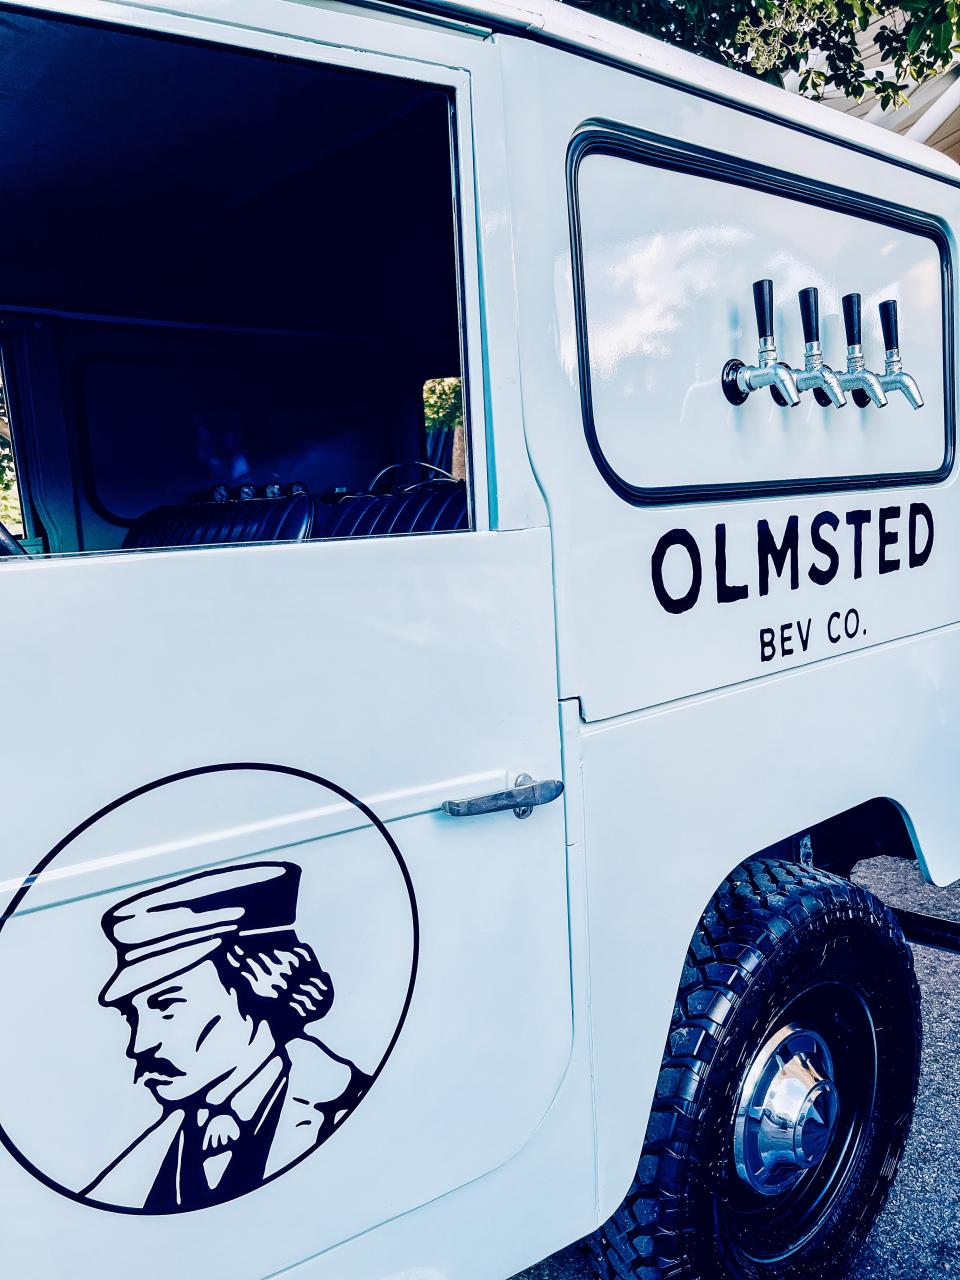 A 1967 Land Cruiser was fully customized for Olmsted Beverage Company to serve at private events. World’s Fair Park, Aug. 13, 2020.